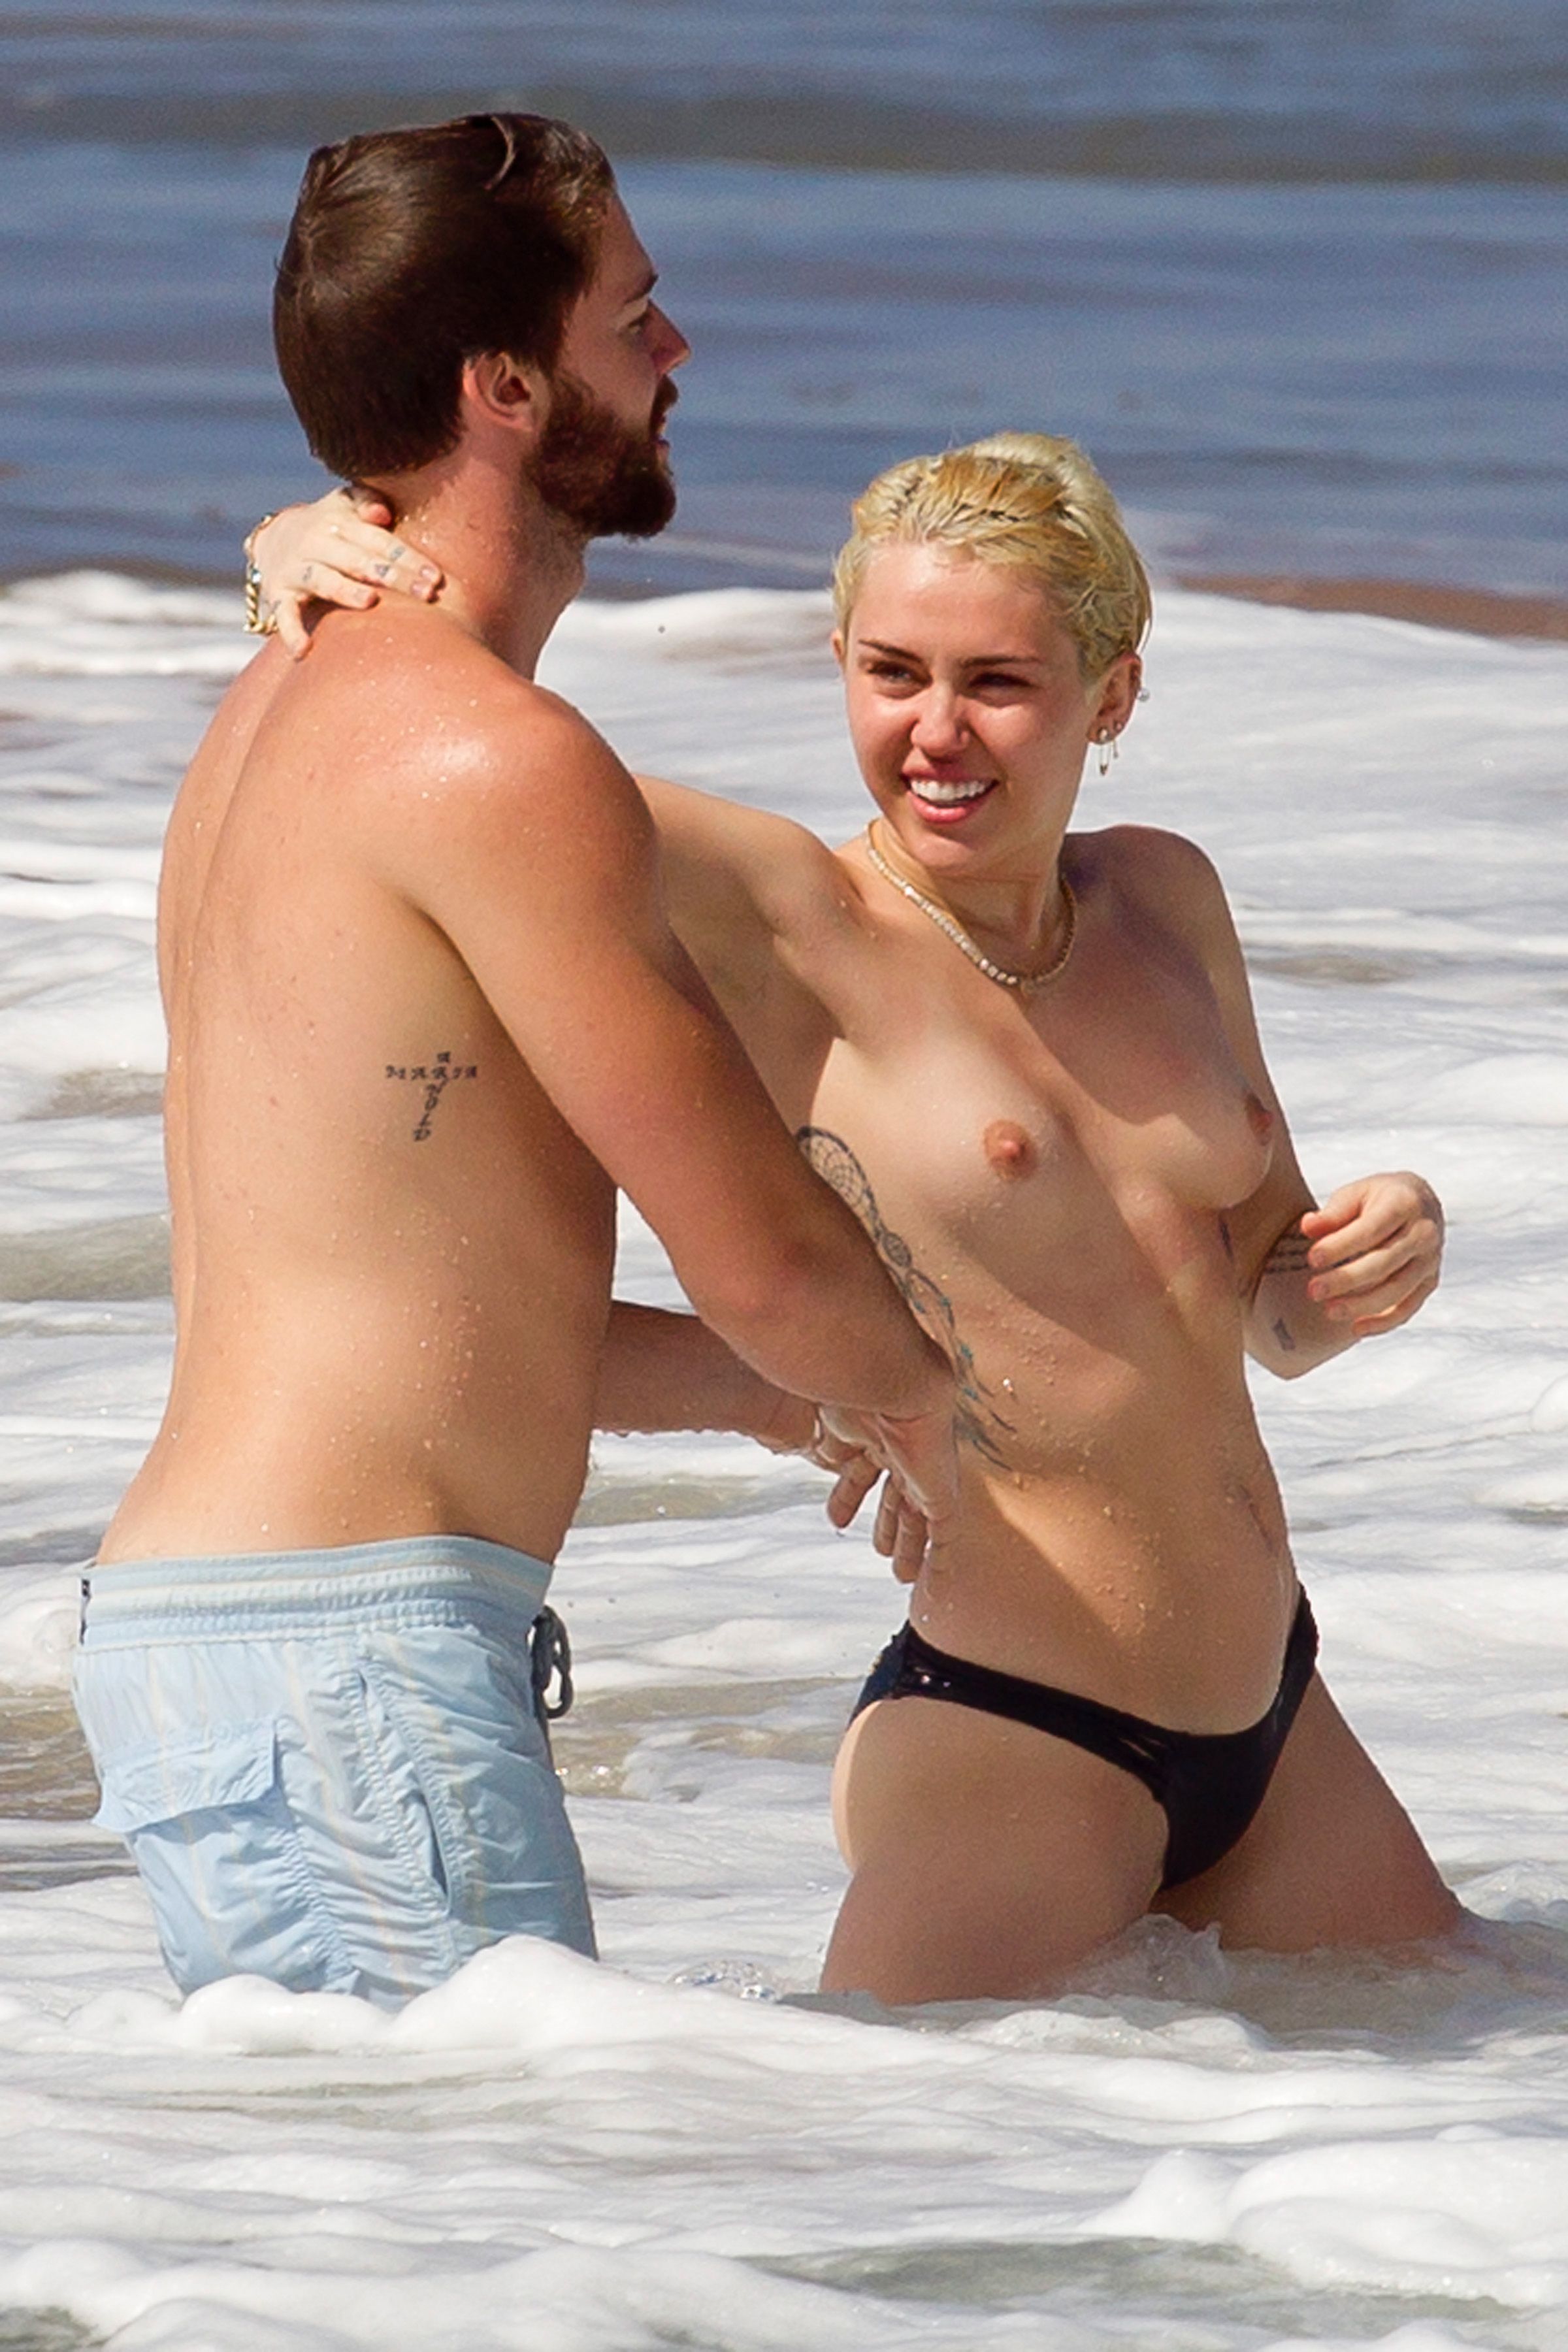 Miley Cyrus Tits Out